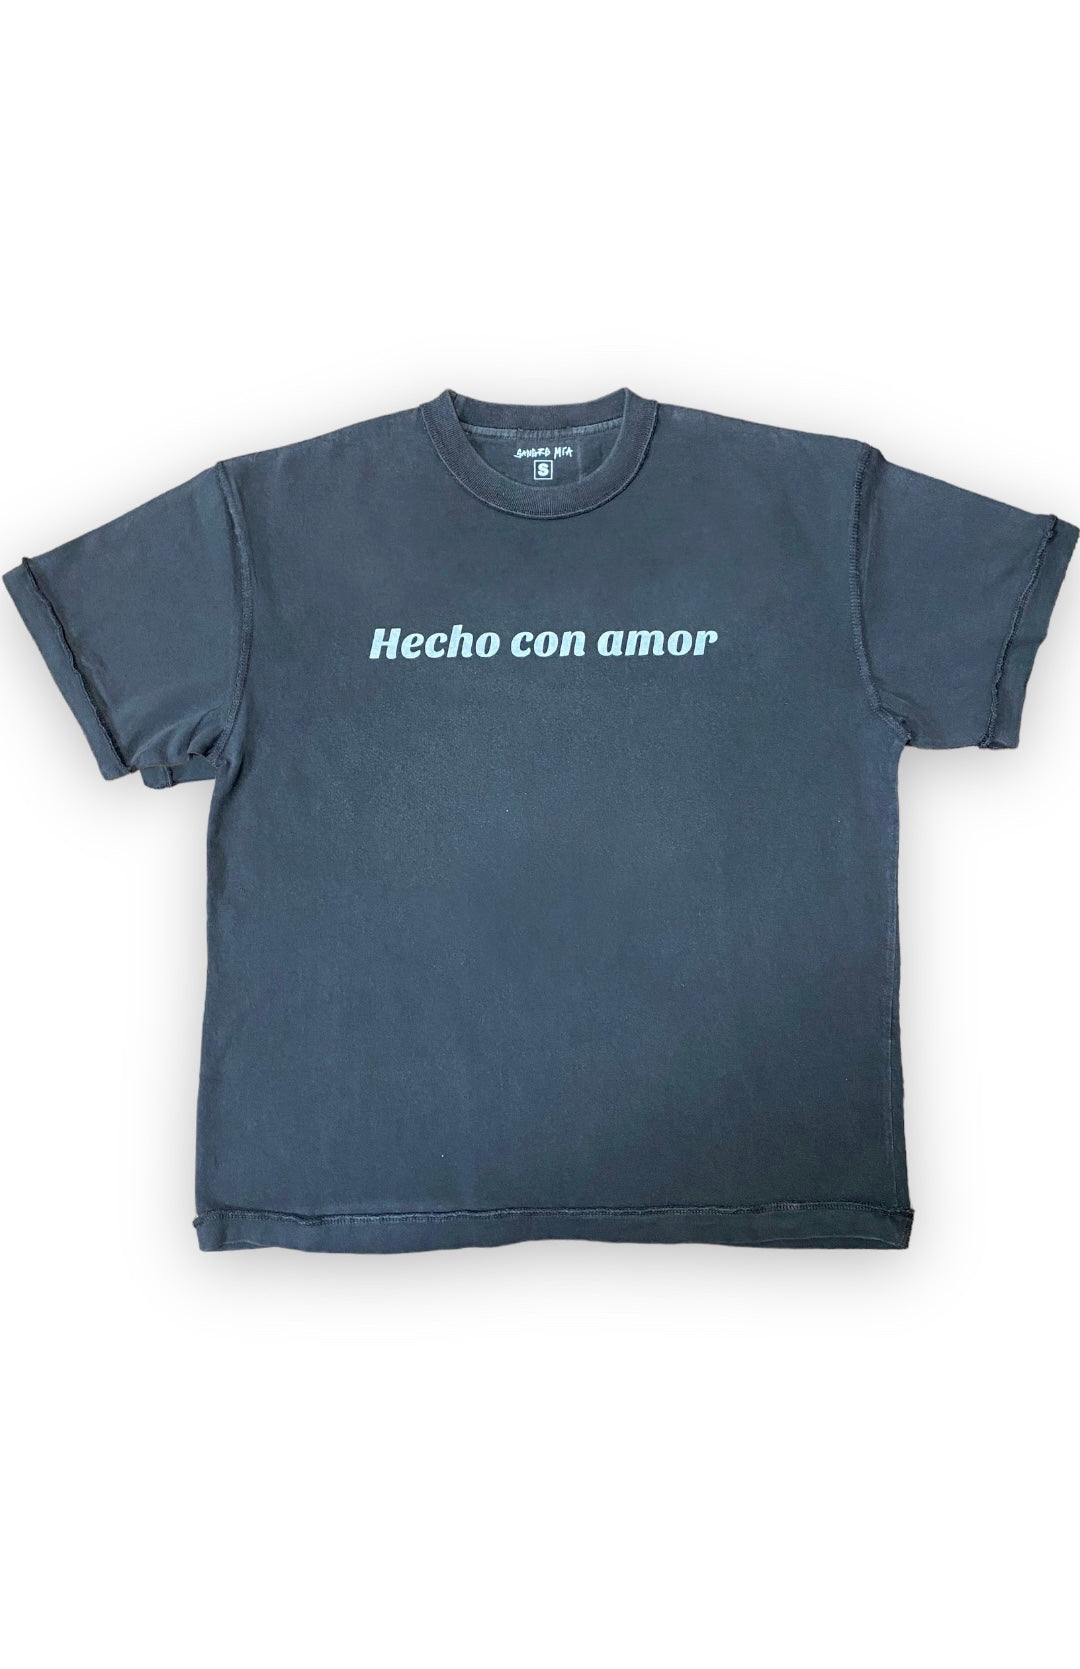 HECHO CON AMOR T-SHIRT